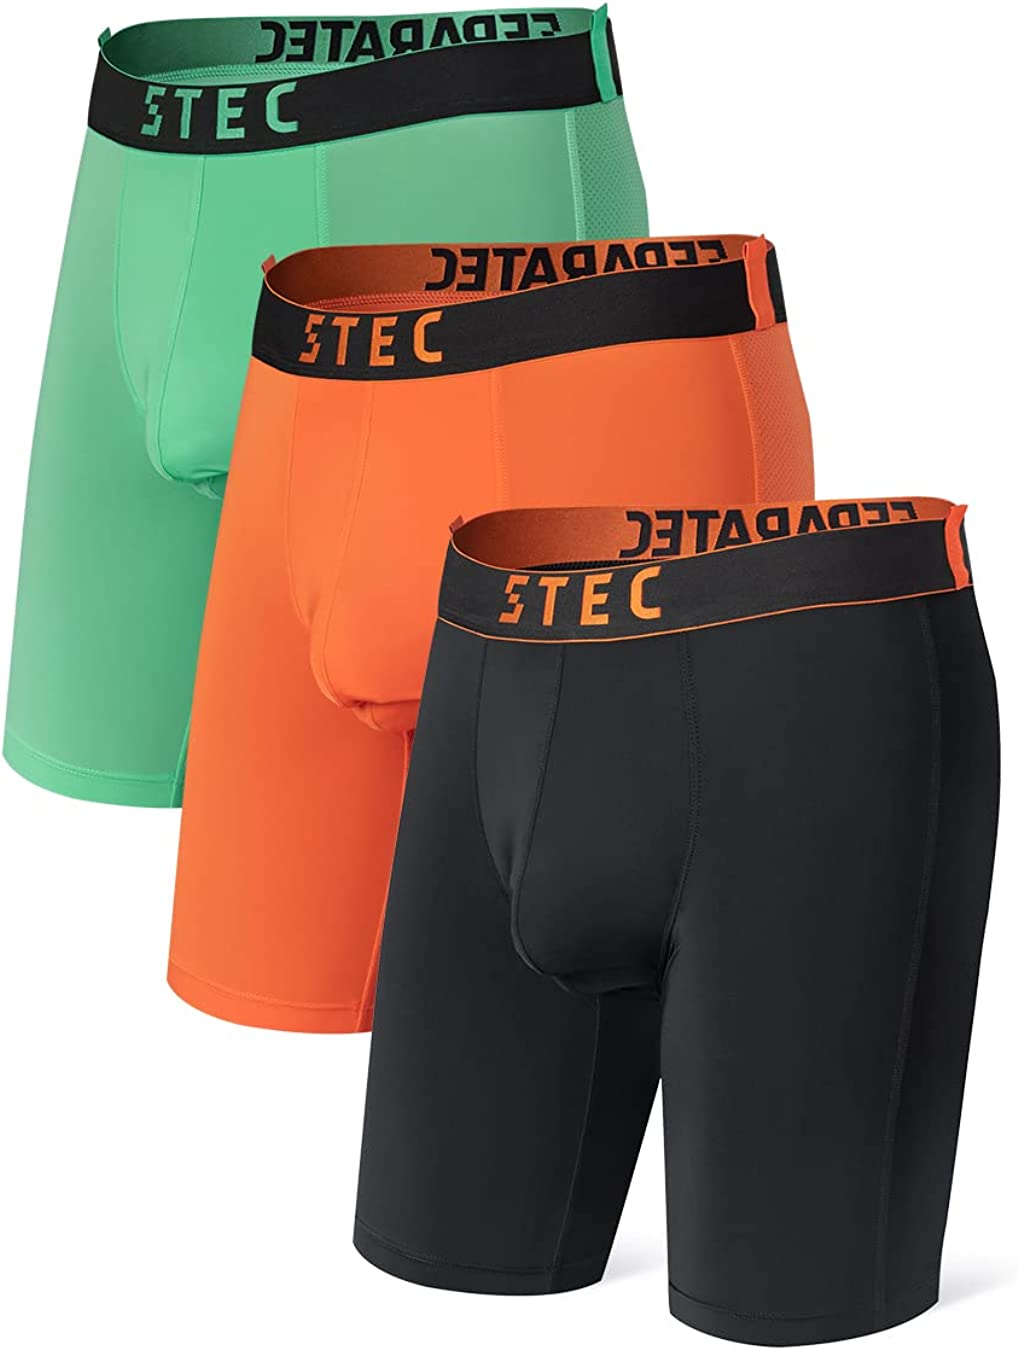 Men's Underwear Expert Separatec Introduces New Summer Offering Featuring Dual  Pouch™ and Quick-Dry Performance